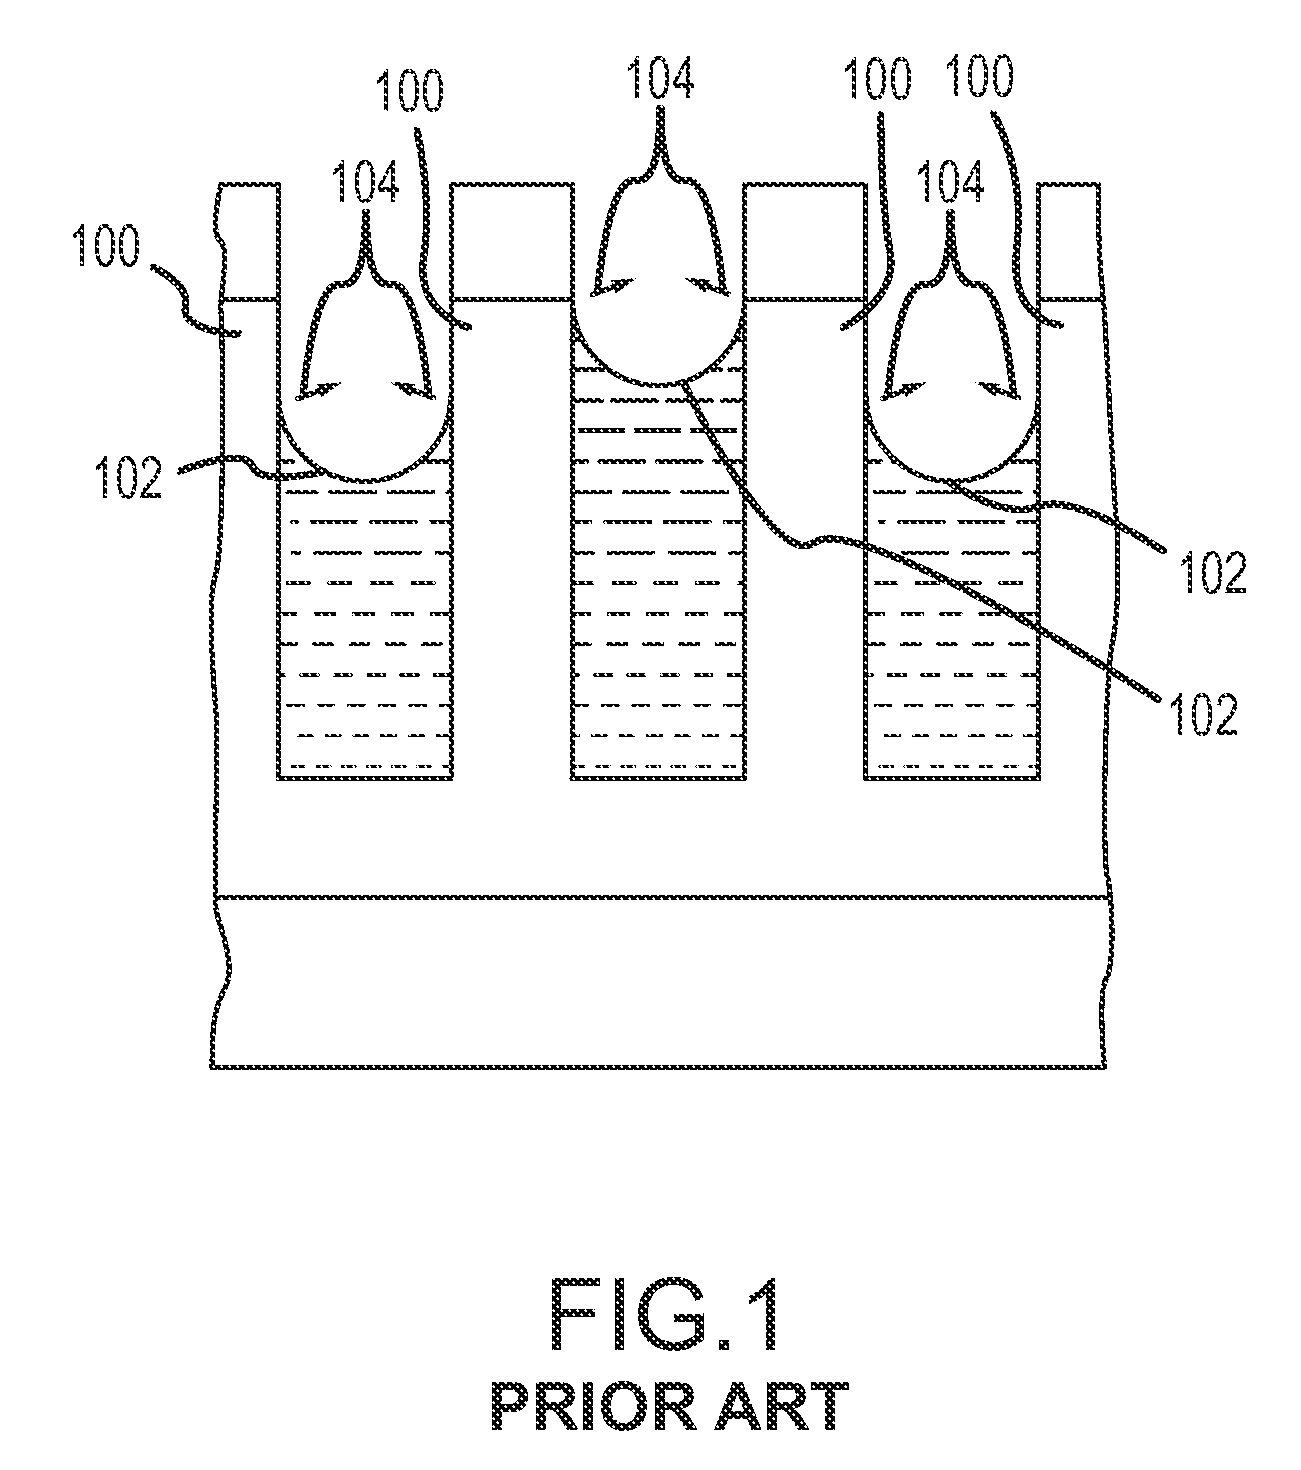 Wet clean method for semiconductor device fabrication processes